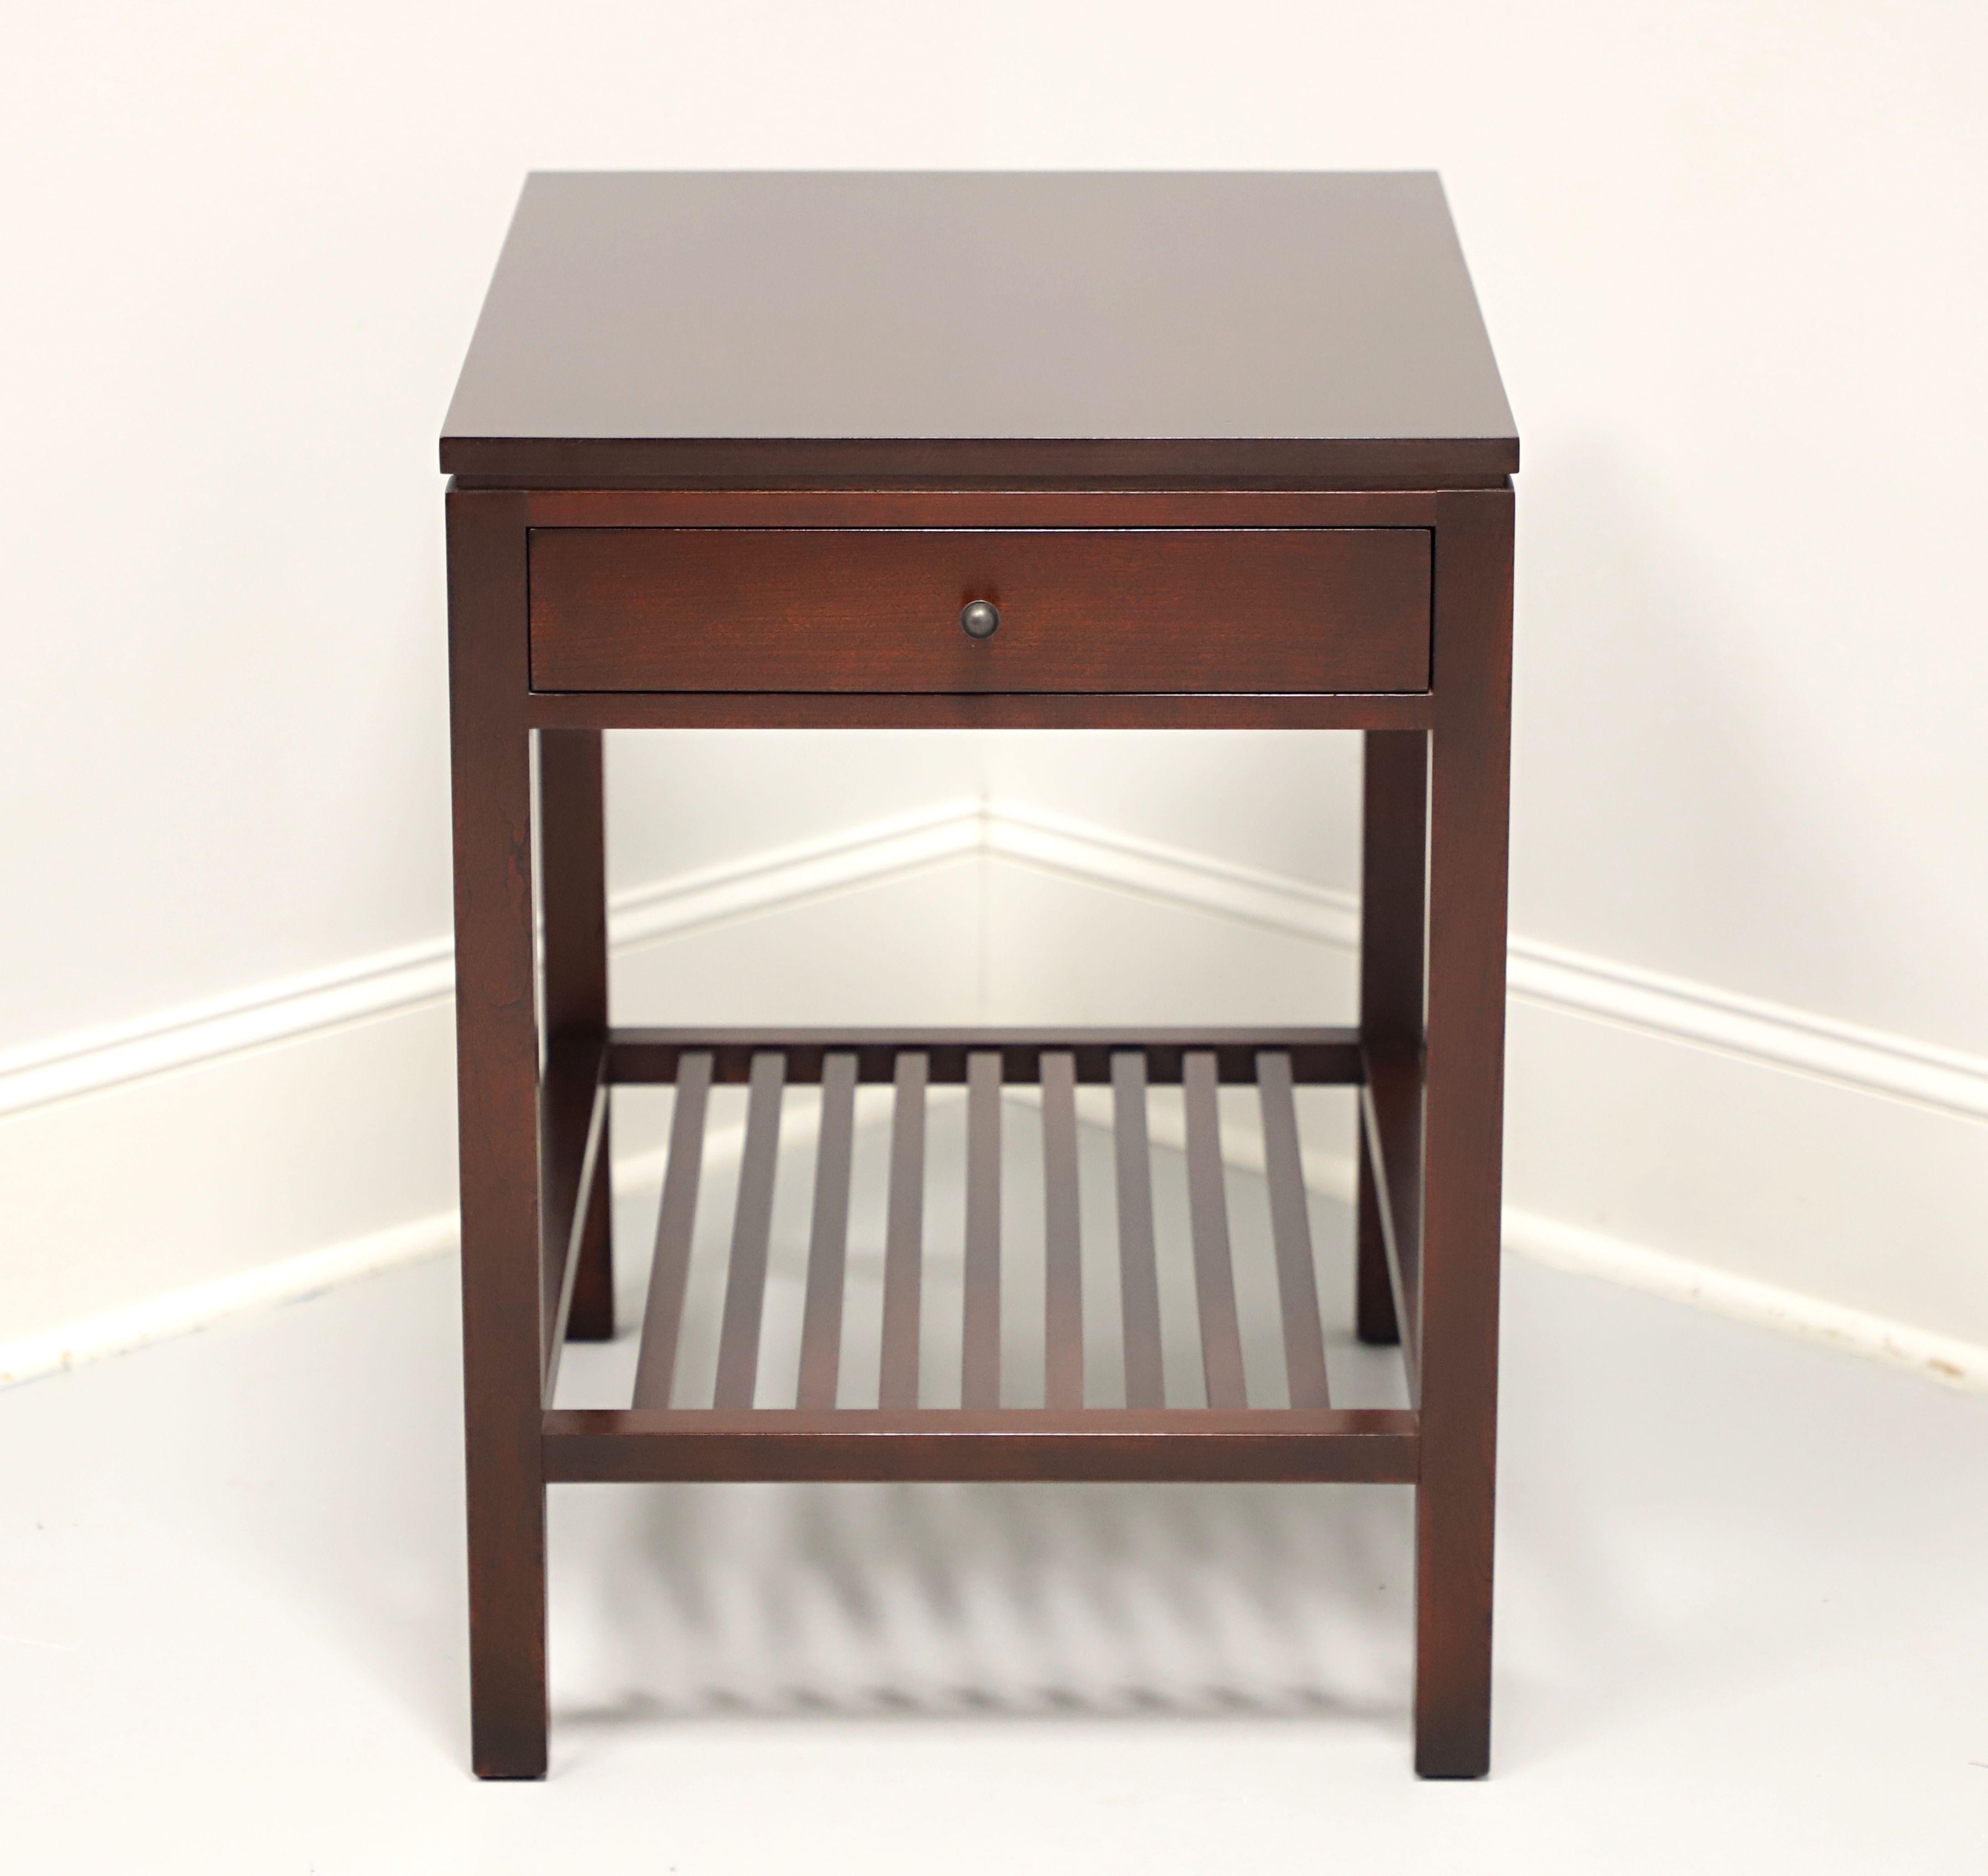 A Modern Contemporary style end table by Stickley Furniture, from their Metropolitan Collection. Cherry wood with their Saratoga finish, square edge to top, dark copper hardware, open slat undertier shelf, and square straight legs. Features one